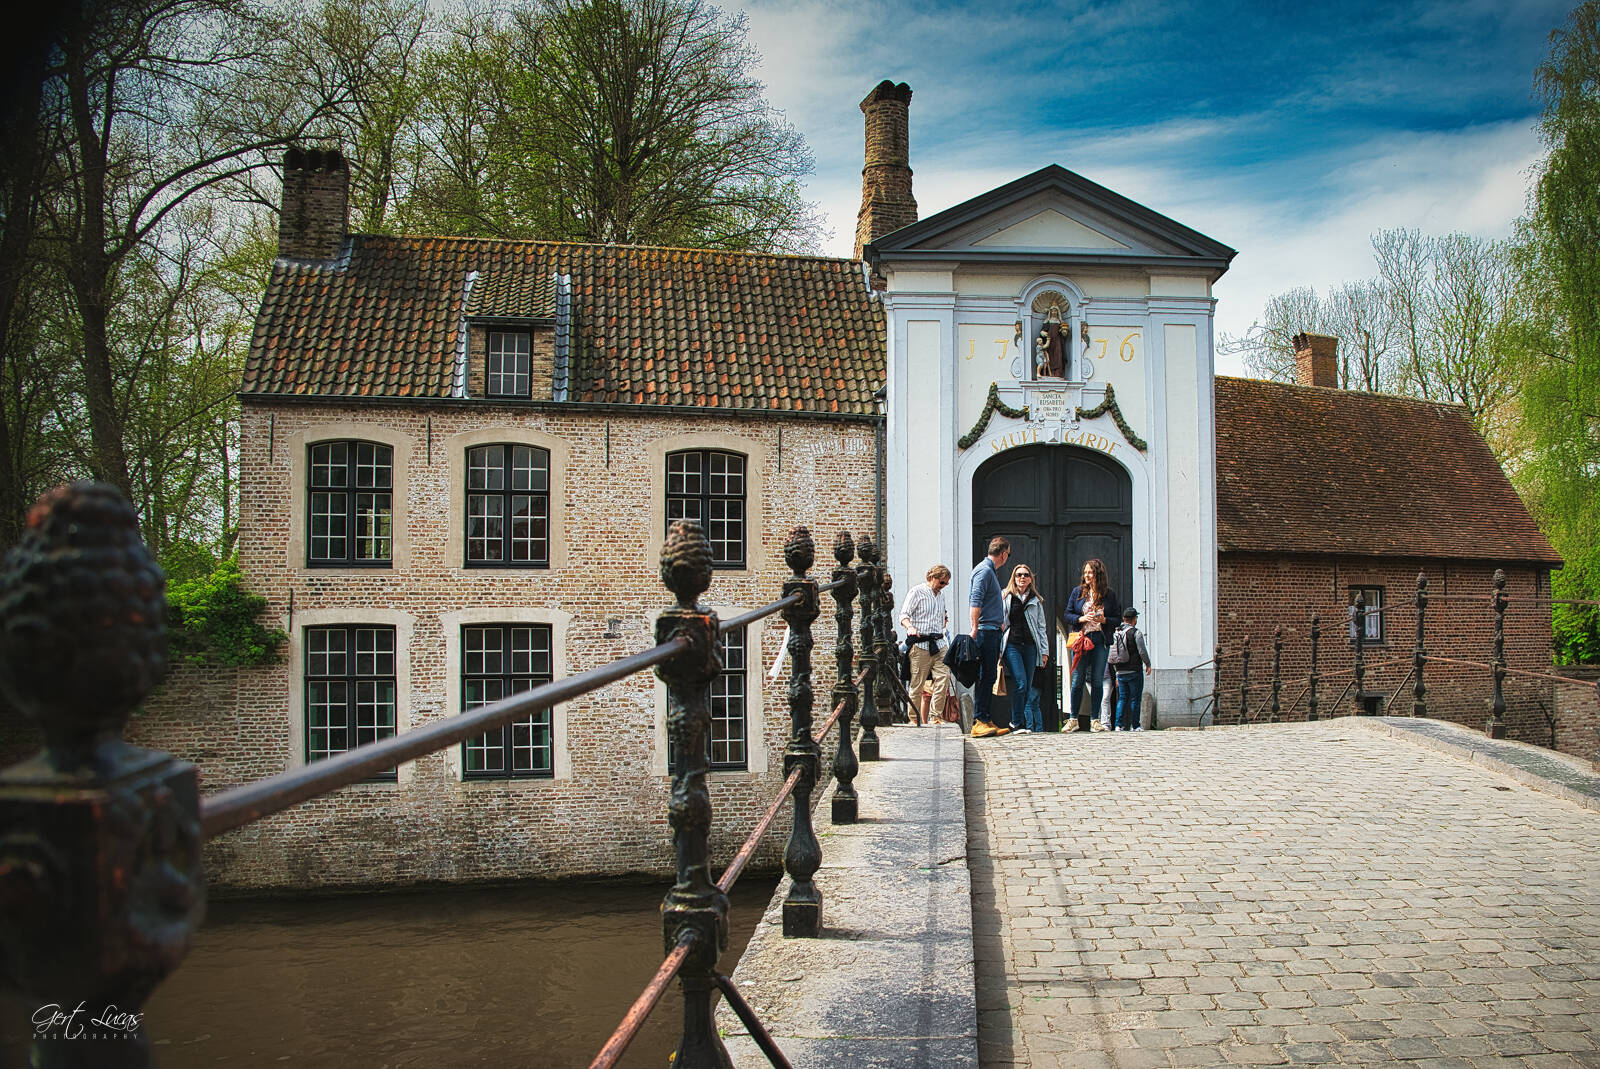 Image of Beguinage Bridge by Gert Lucas